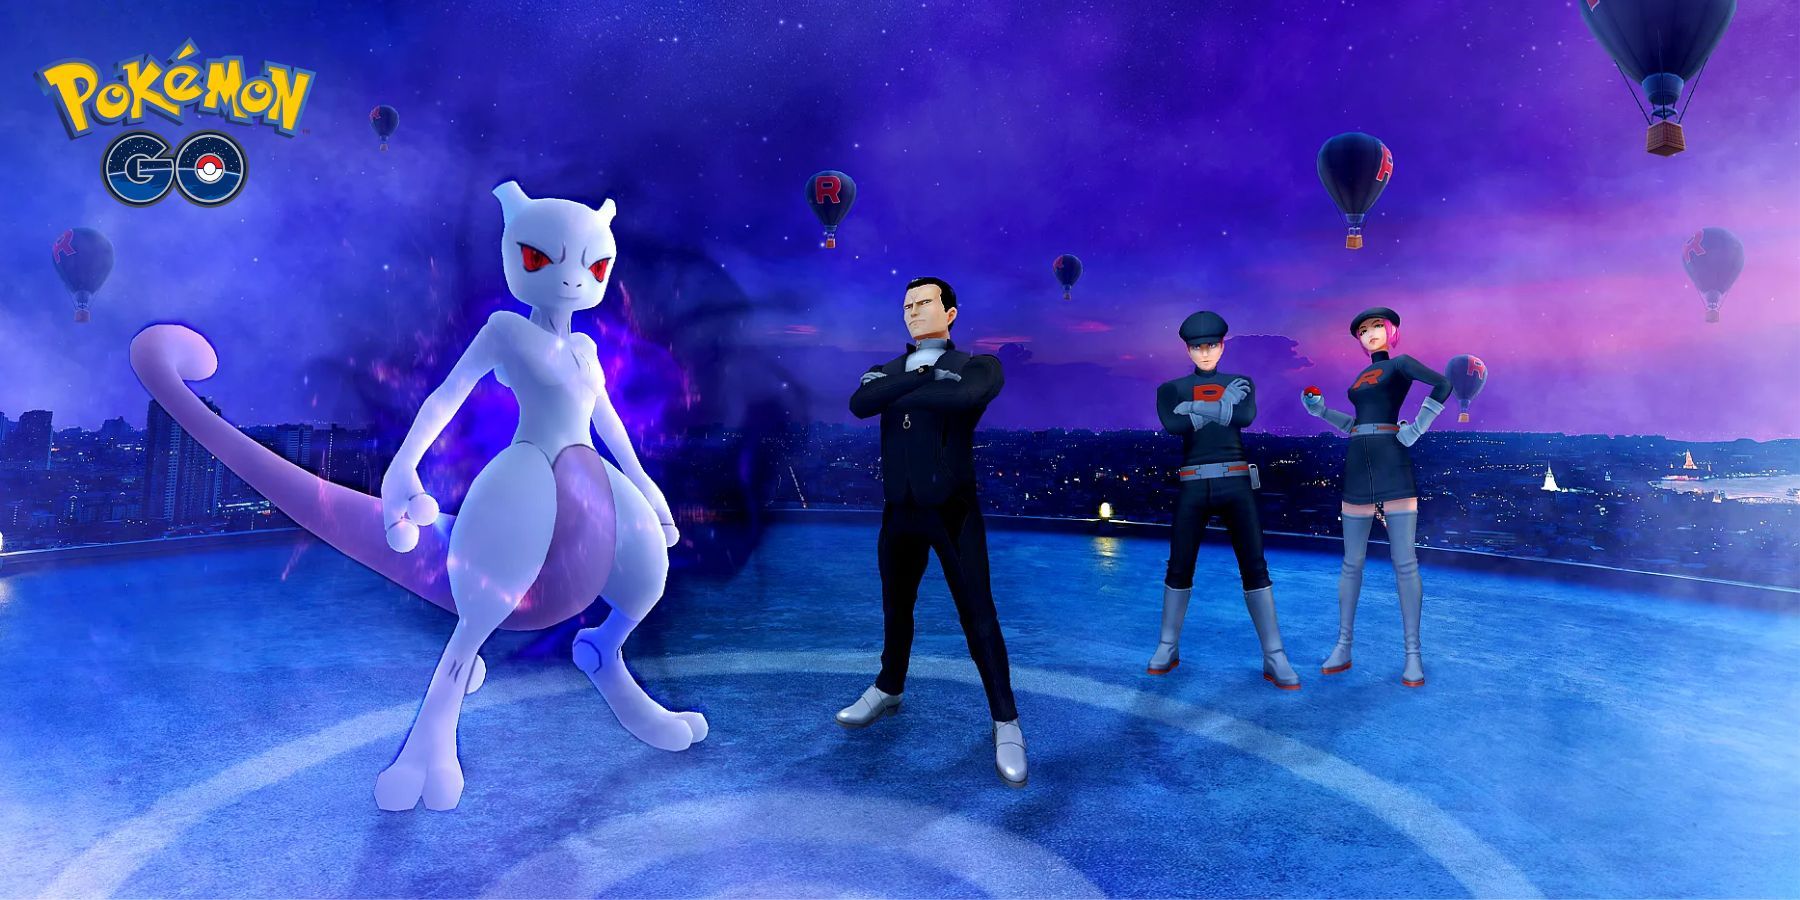 Shadow Mewtwo Weaknesses and Resistances in Pokemon GO